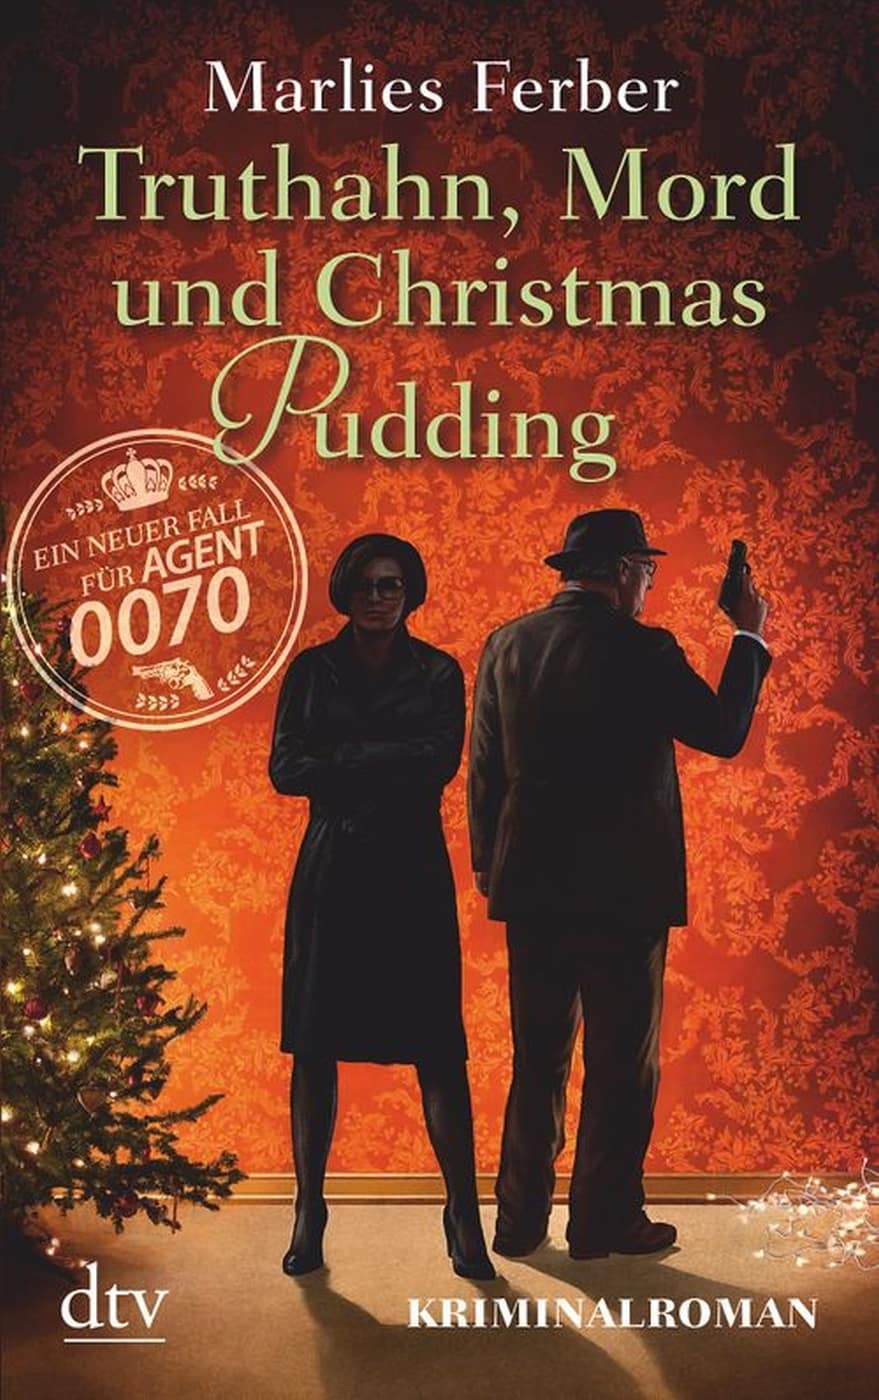 LITL168 [Podcast] Rezension: Truthahn, Mord und Christmas Pudding  – Marlies Ferber